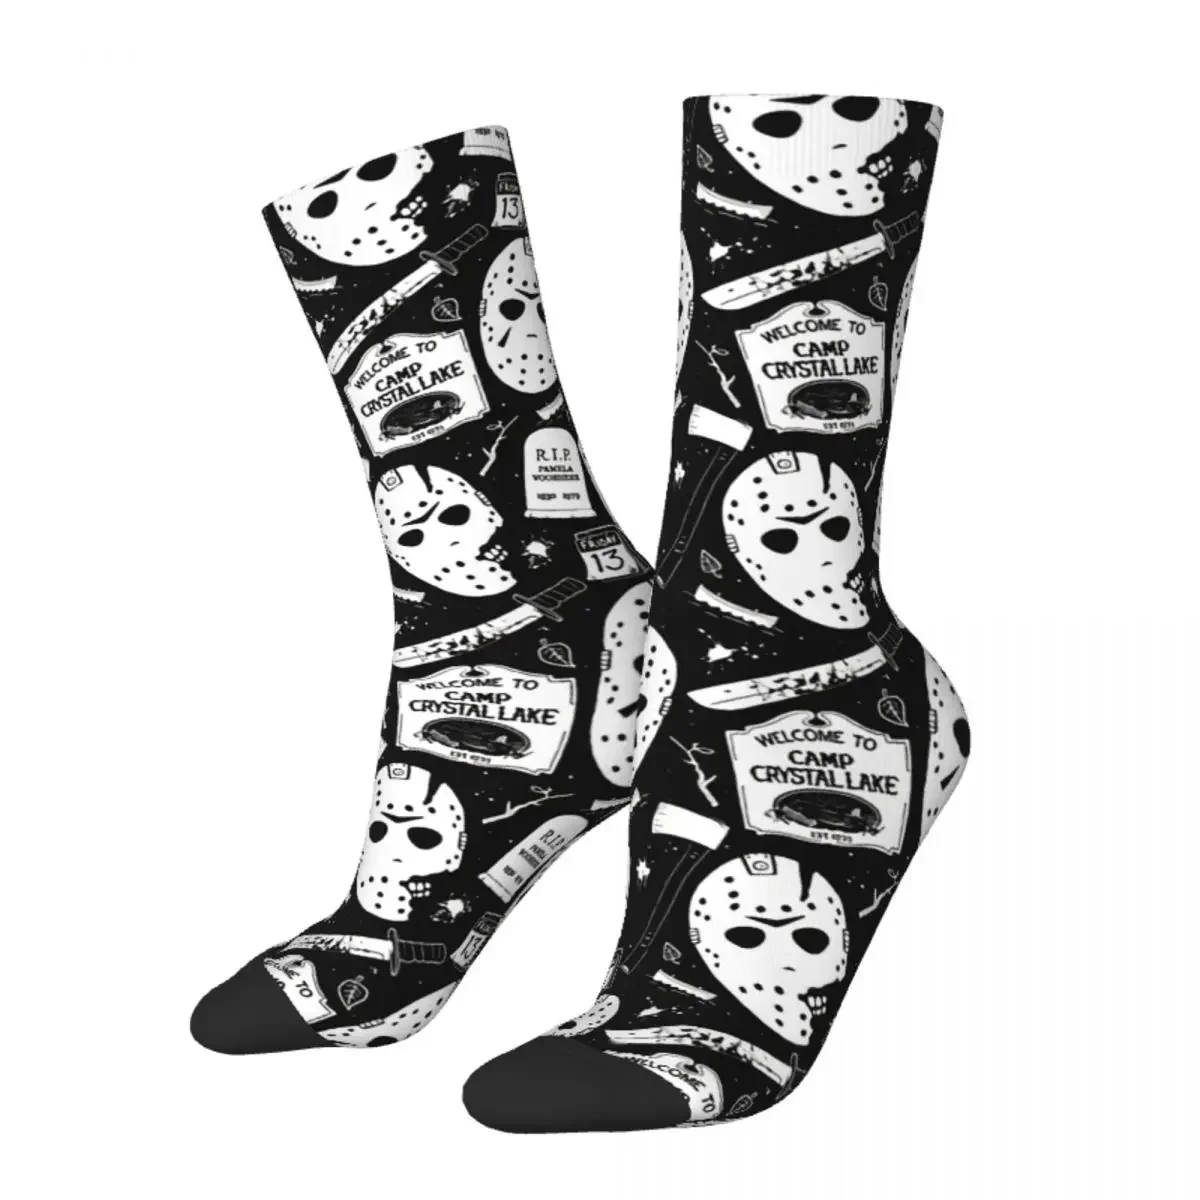 

Funny Men's Socks Welcome Campers Retro Harajuku Horror Movies Street Style Seamless Crew Crazy Sock Gift Pattern Printed